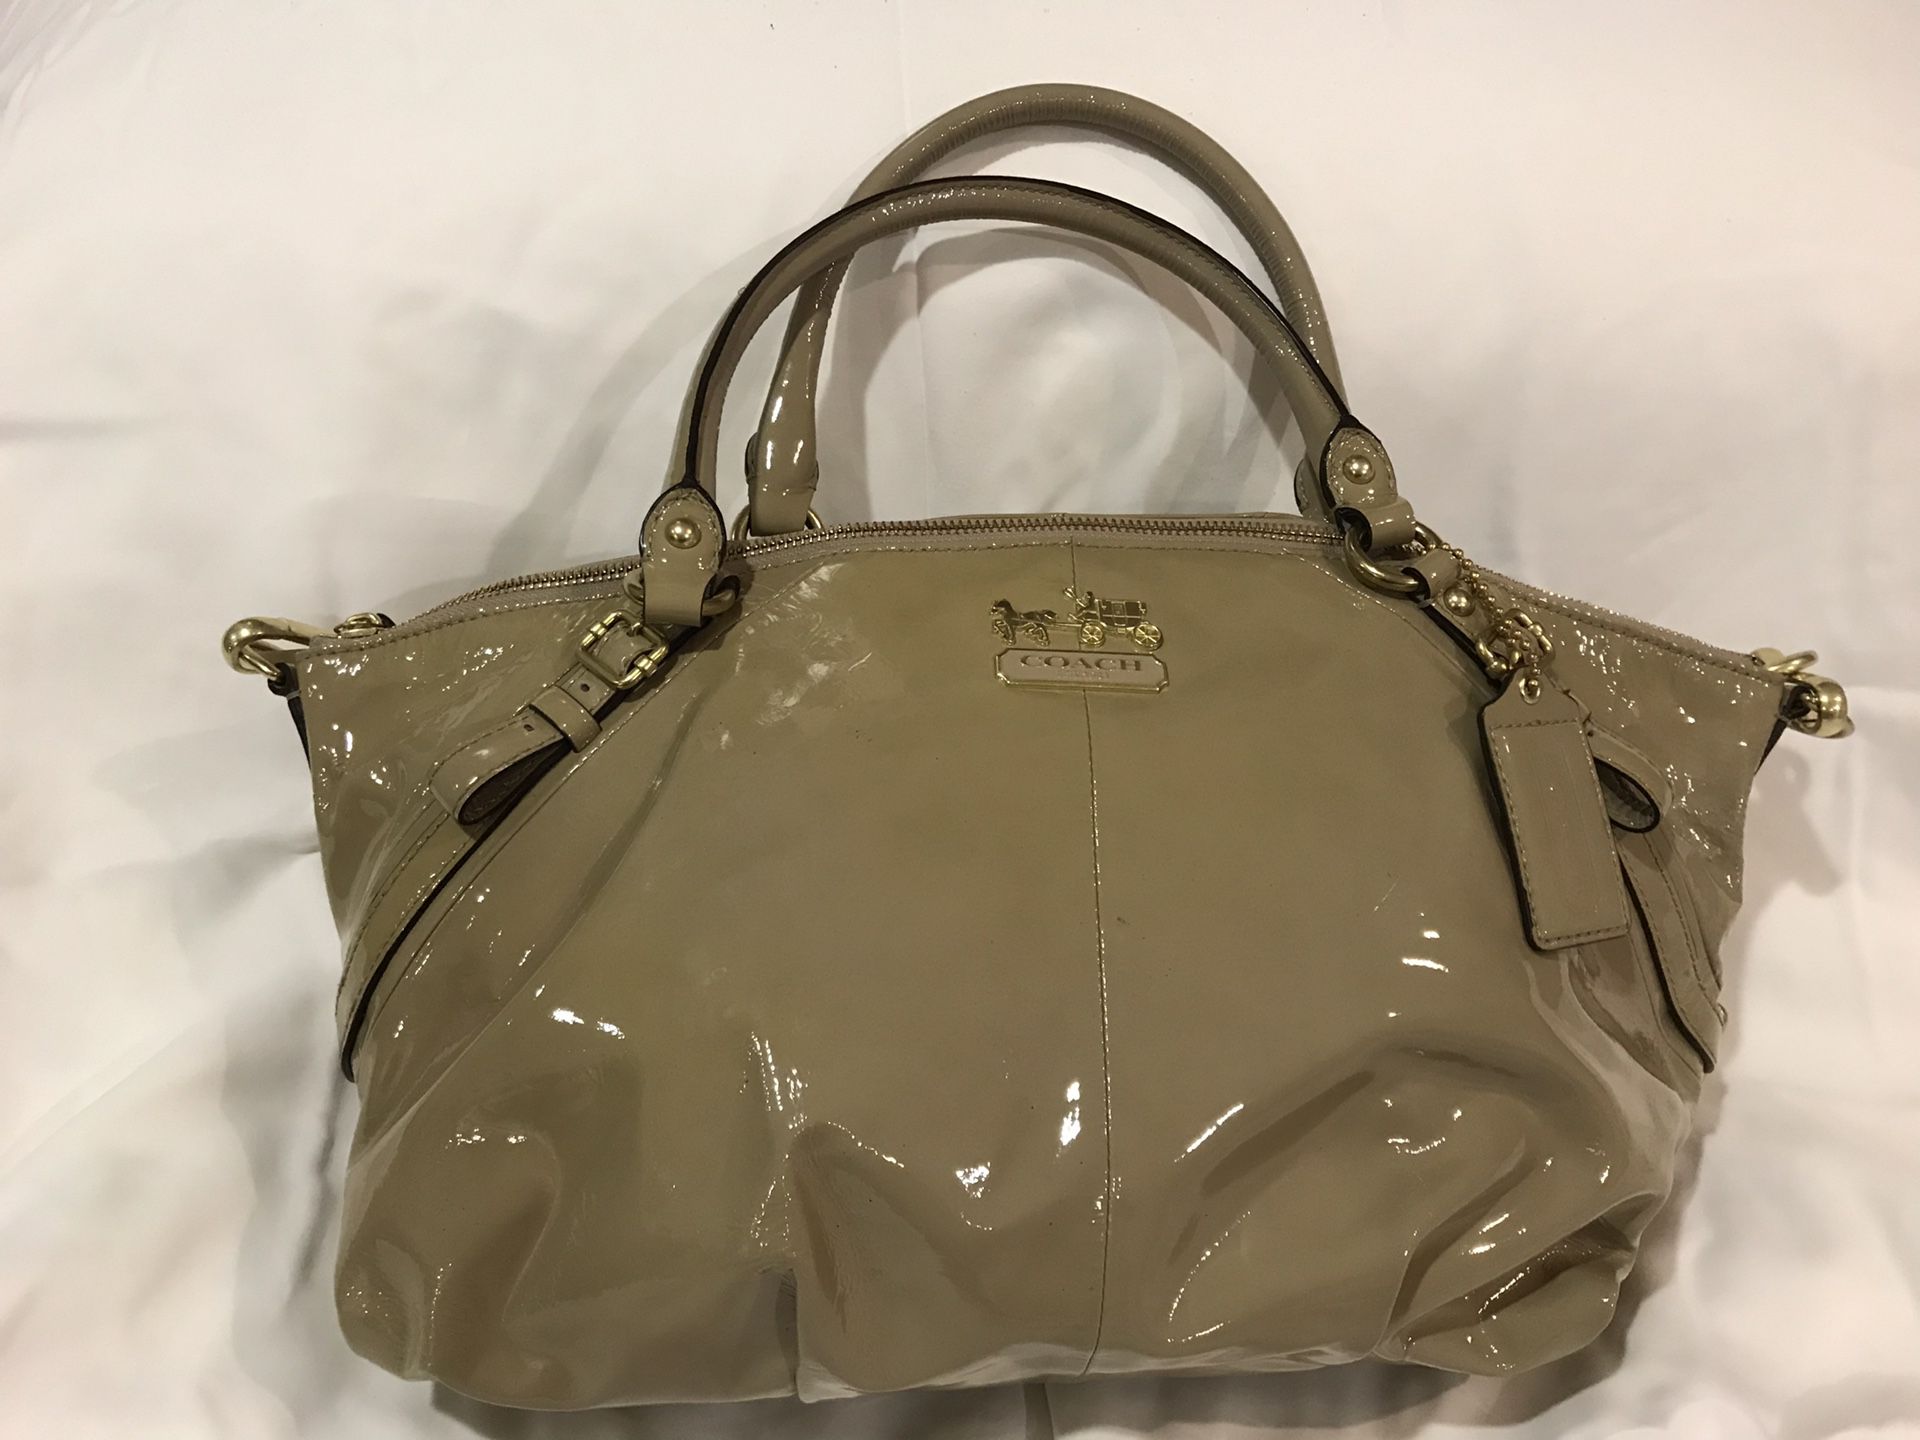 Coach Patent Leather Madison Satchel in Beige/Taupe/Nude Bag Purse for Sale  in Renton, WA - OfferUp